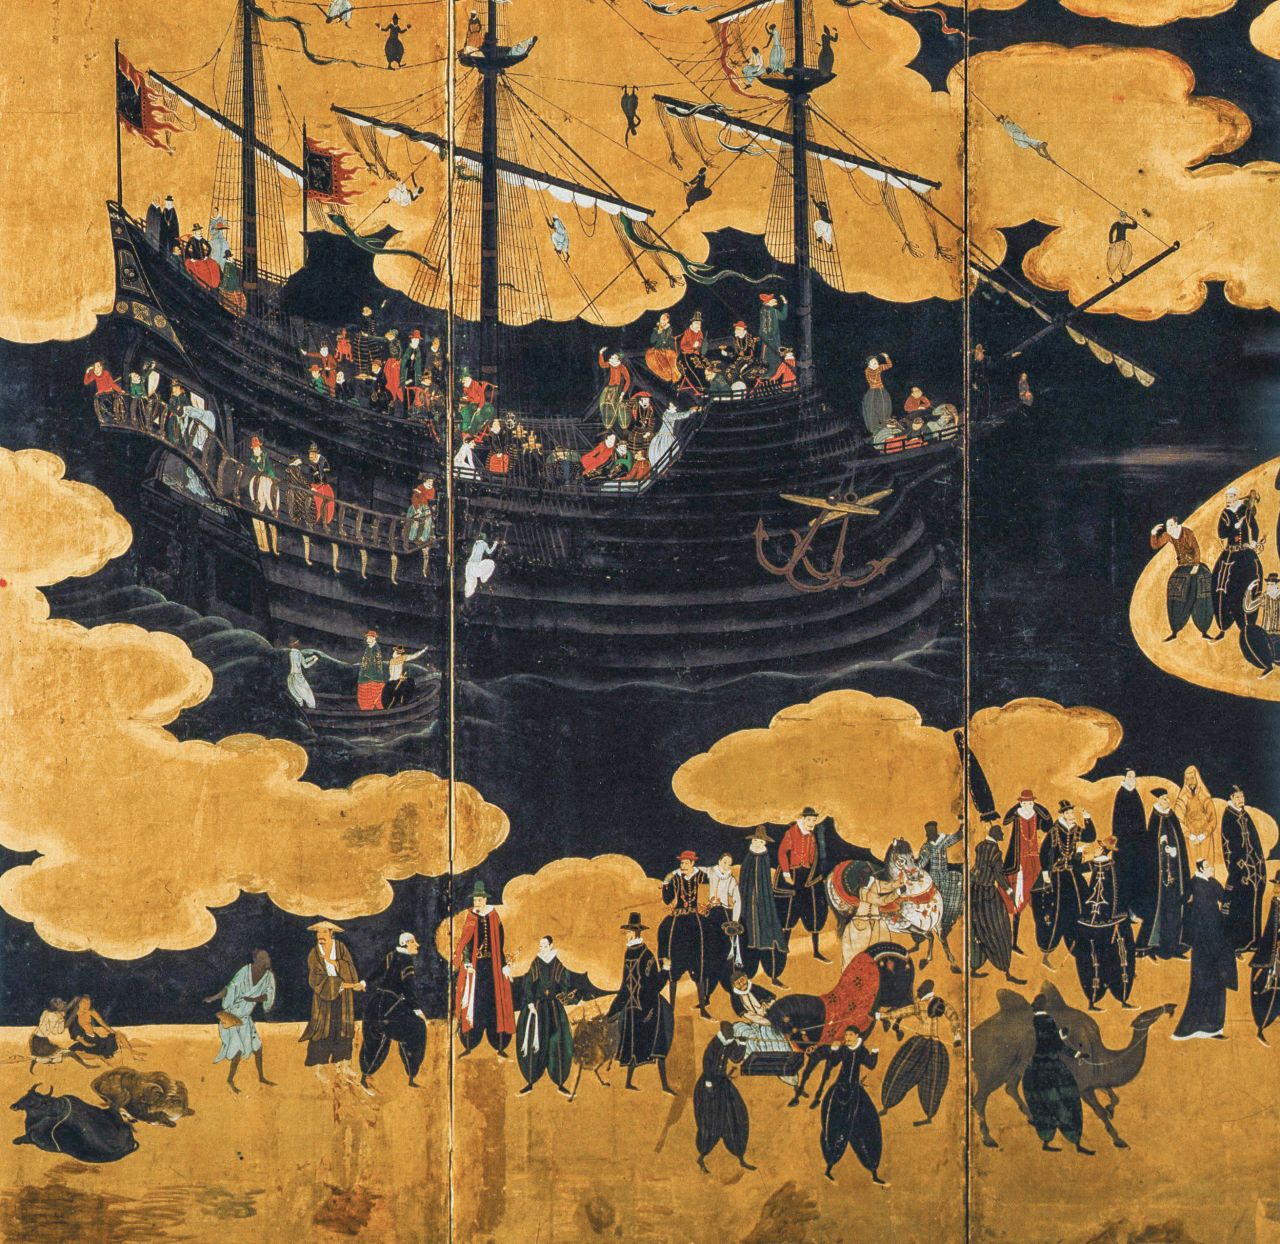 A Portuguese black ship arrives in Japan from Goa and Macau.